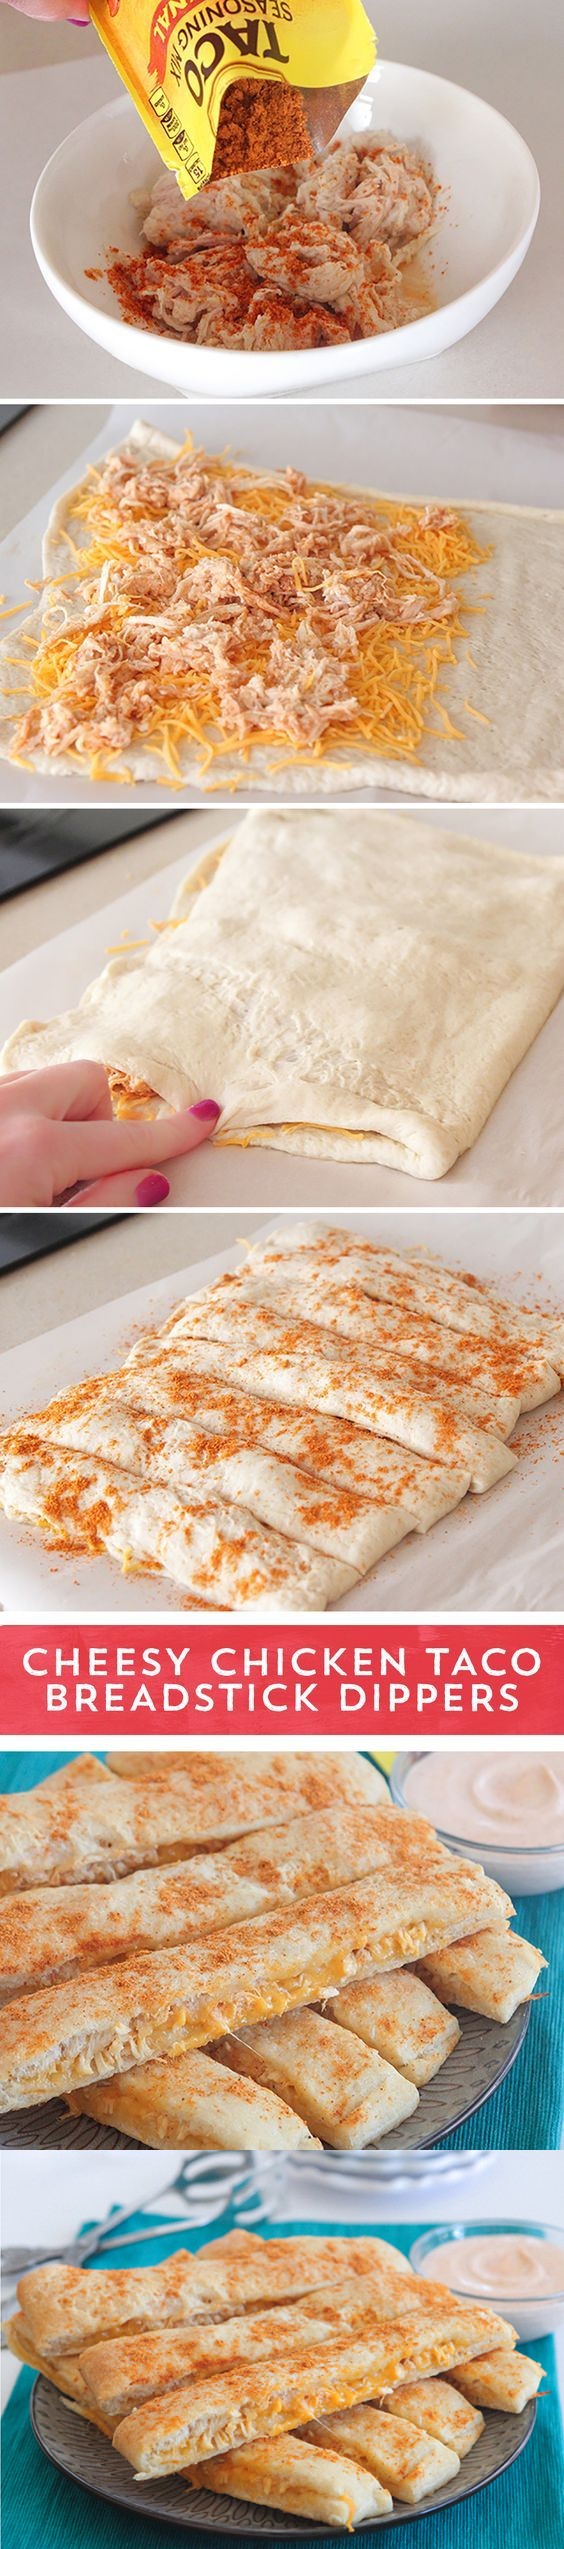 Cheesy Chicken Taco Breadstick Dippers